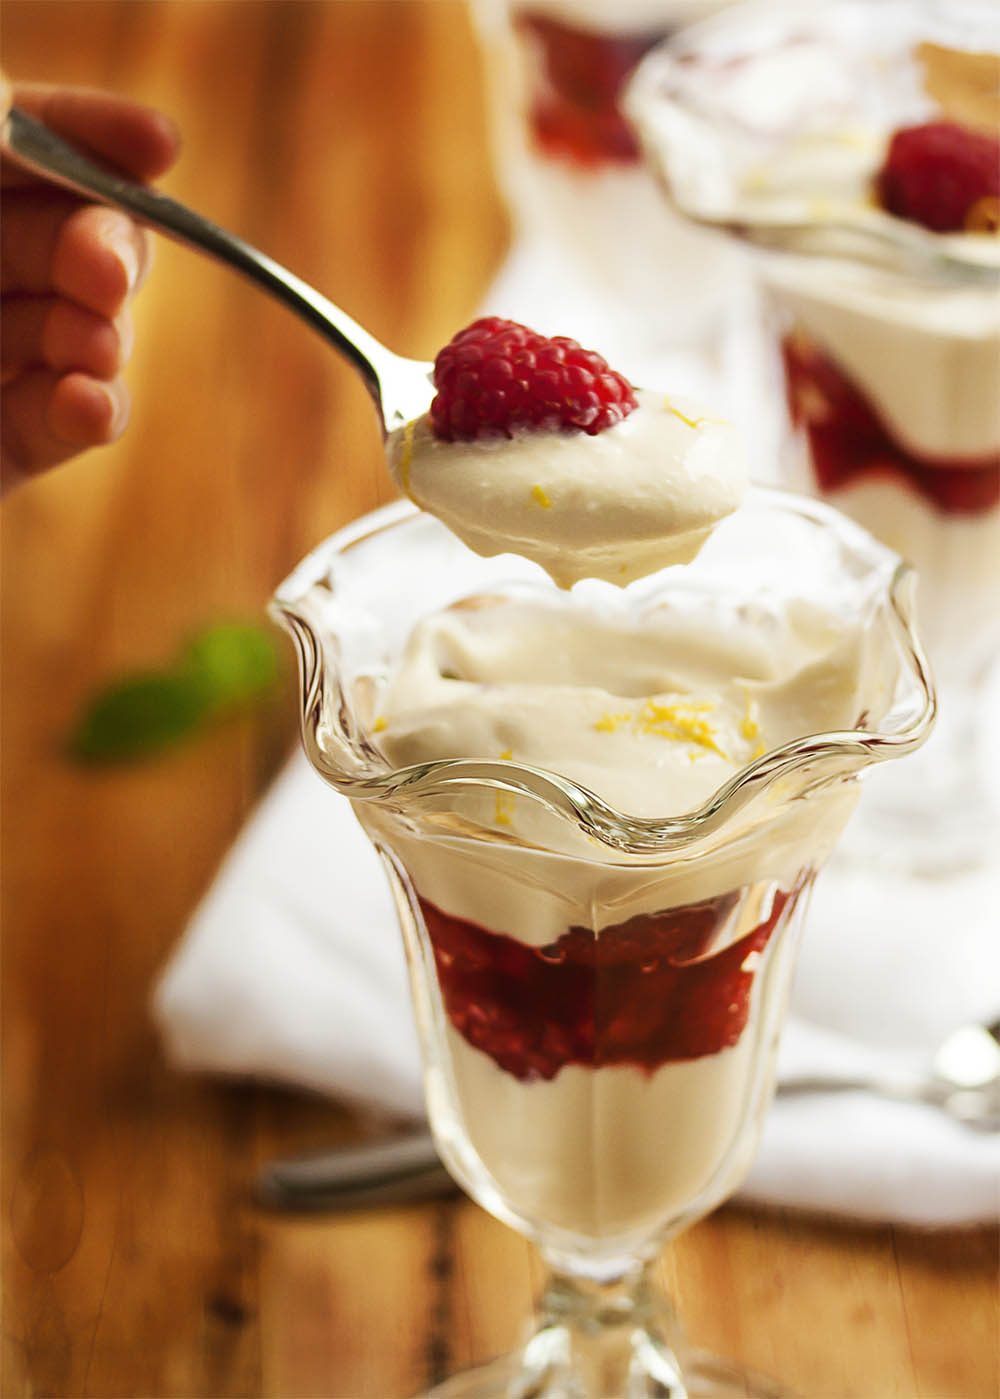 Raspberry Parfait with Ricotta Cream - In the mood for a healthy dessert that tastes like an indulgence? Creamy, lightly sweetened ricotta is layered with raspberries in this very easy and pretty parfait. | justalittlebitofbacon.com